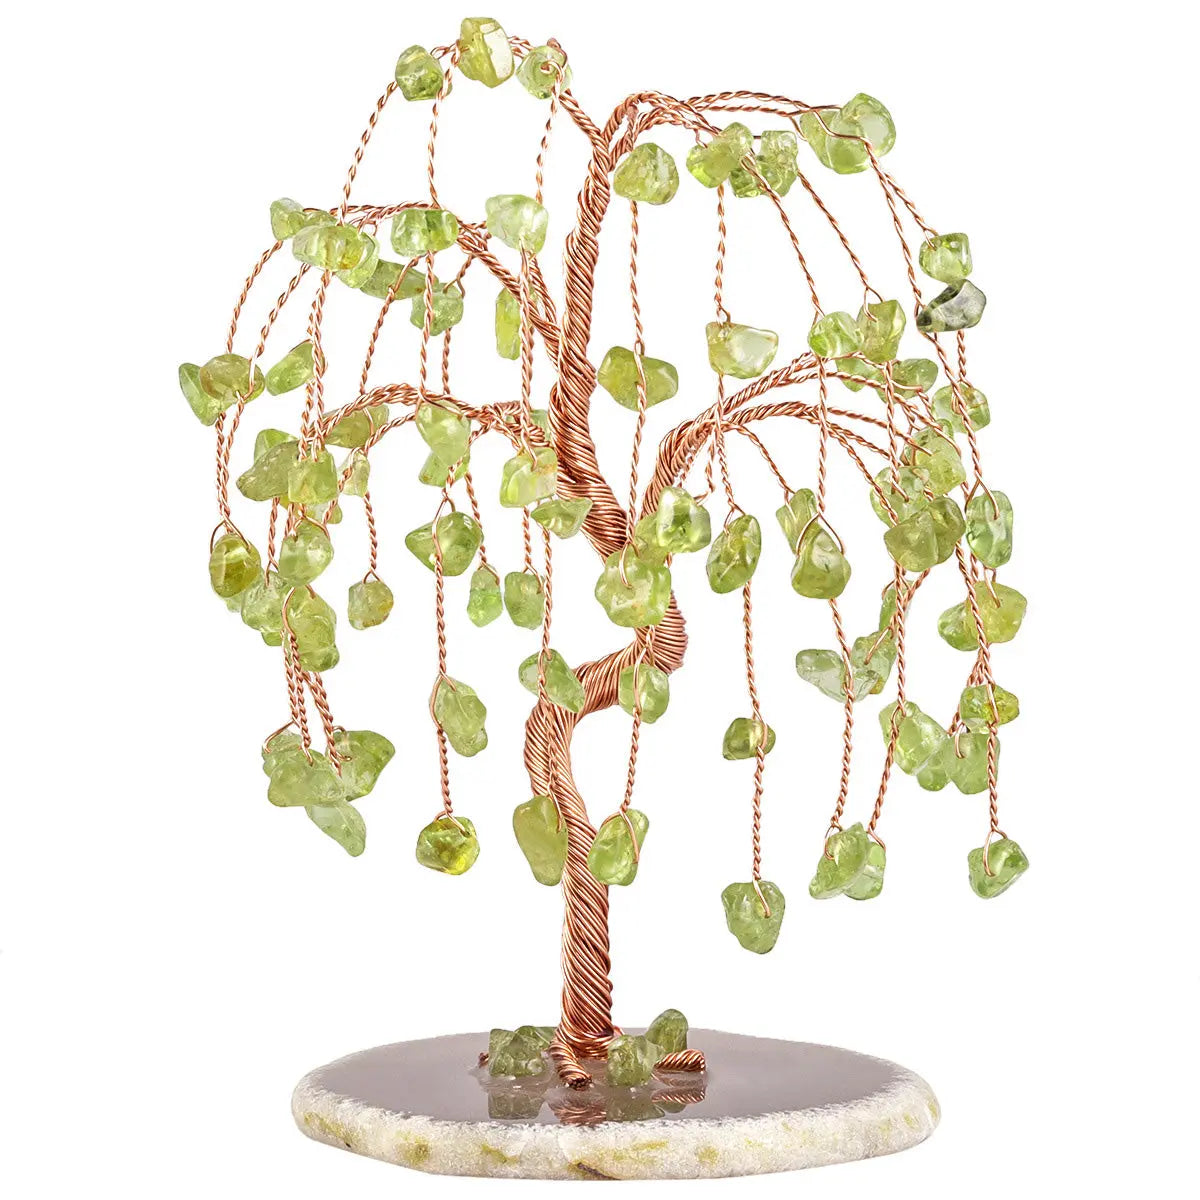 Willow Crystal Tree Energy Crystal Gravel Agate Base Crafts, Amethyst, Rose Quartz, Peridot Crystals Tree - Good Luck Wealth & Health Healing Crystal Home